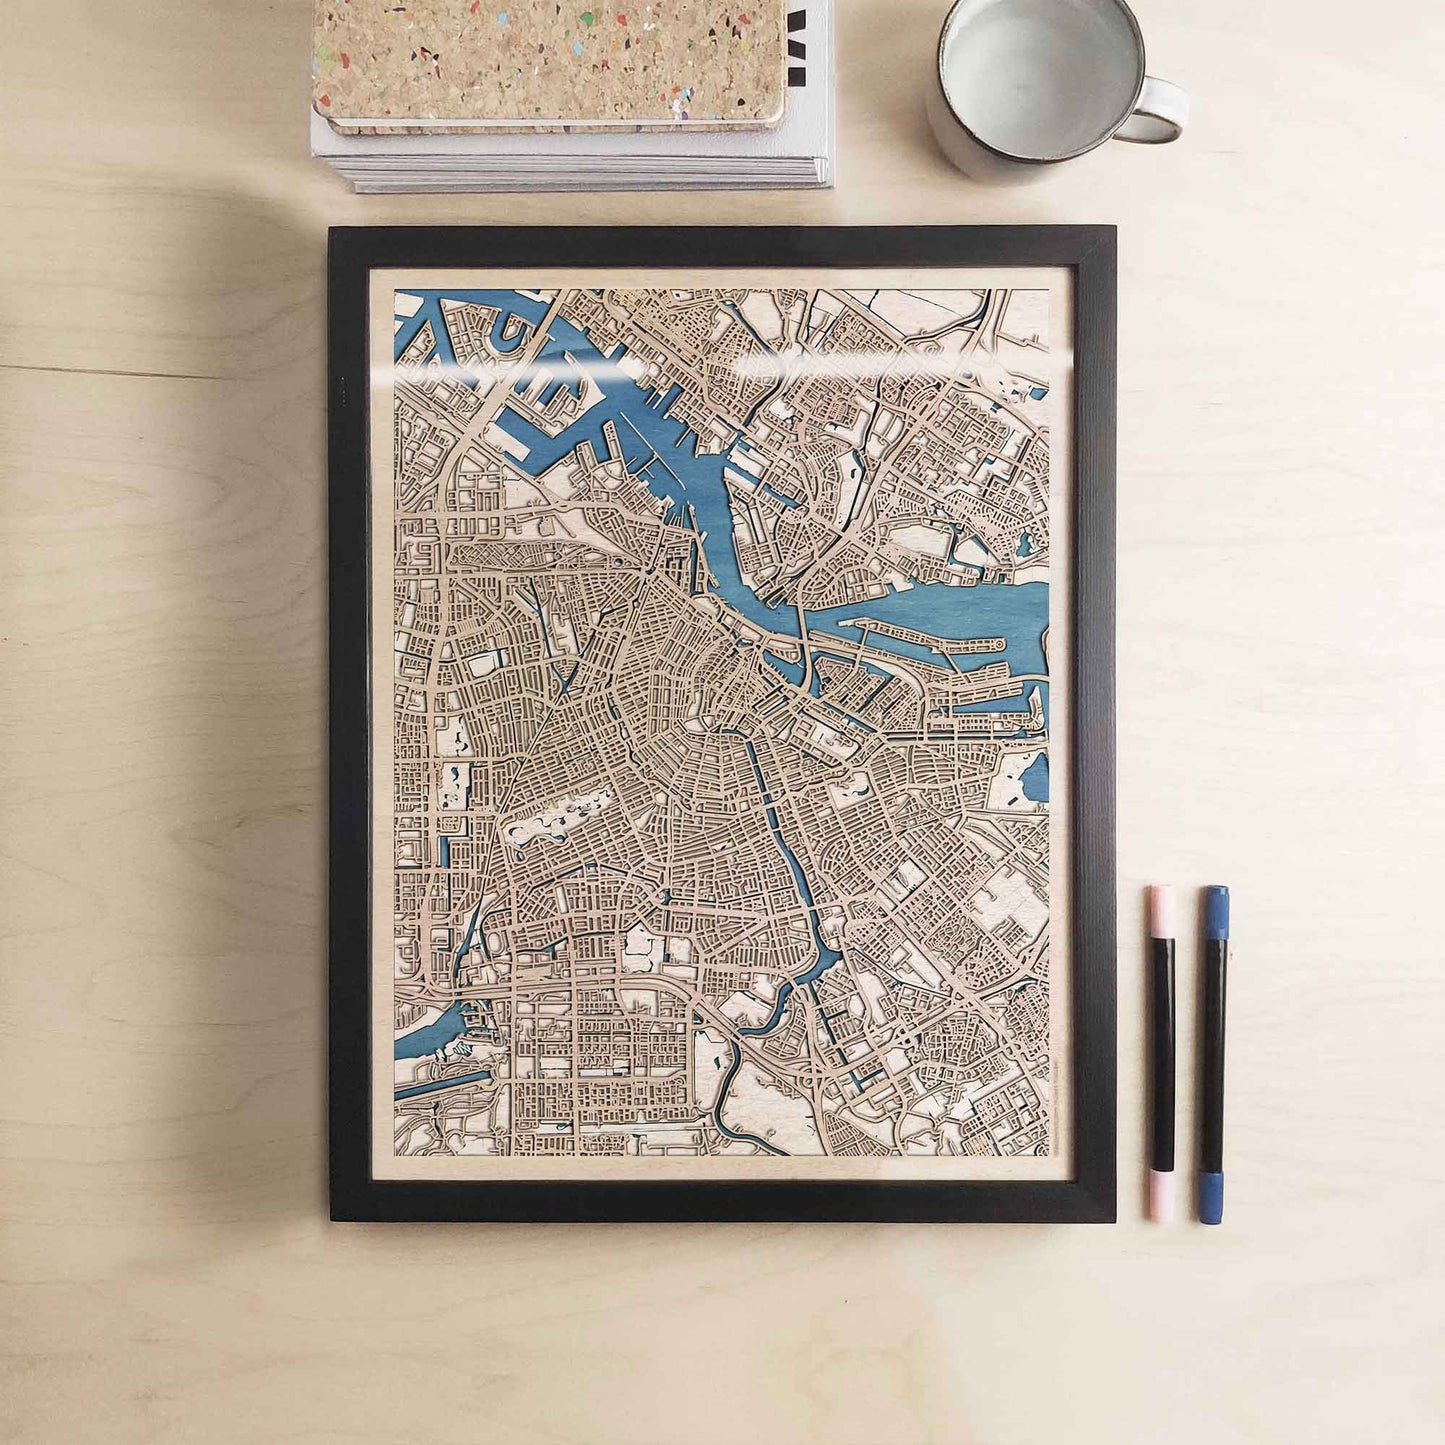 Amsterdam Wooden Map by CityWood - Custom Wood Map Art - Unique Laser Cut Engraved - Anniversary Gift